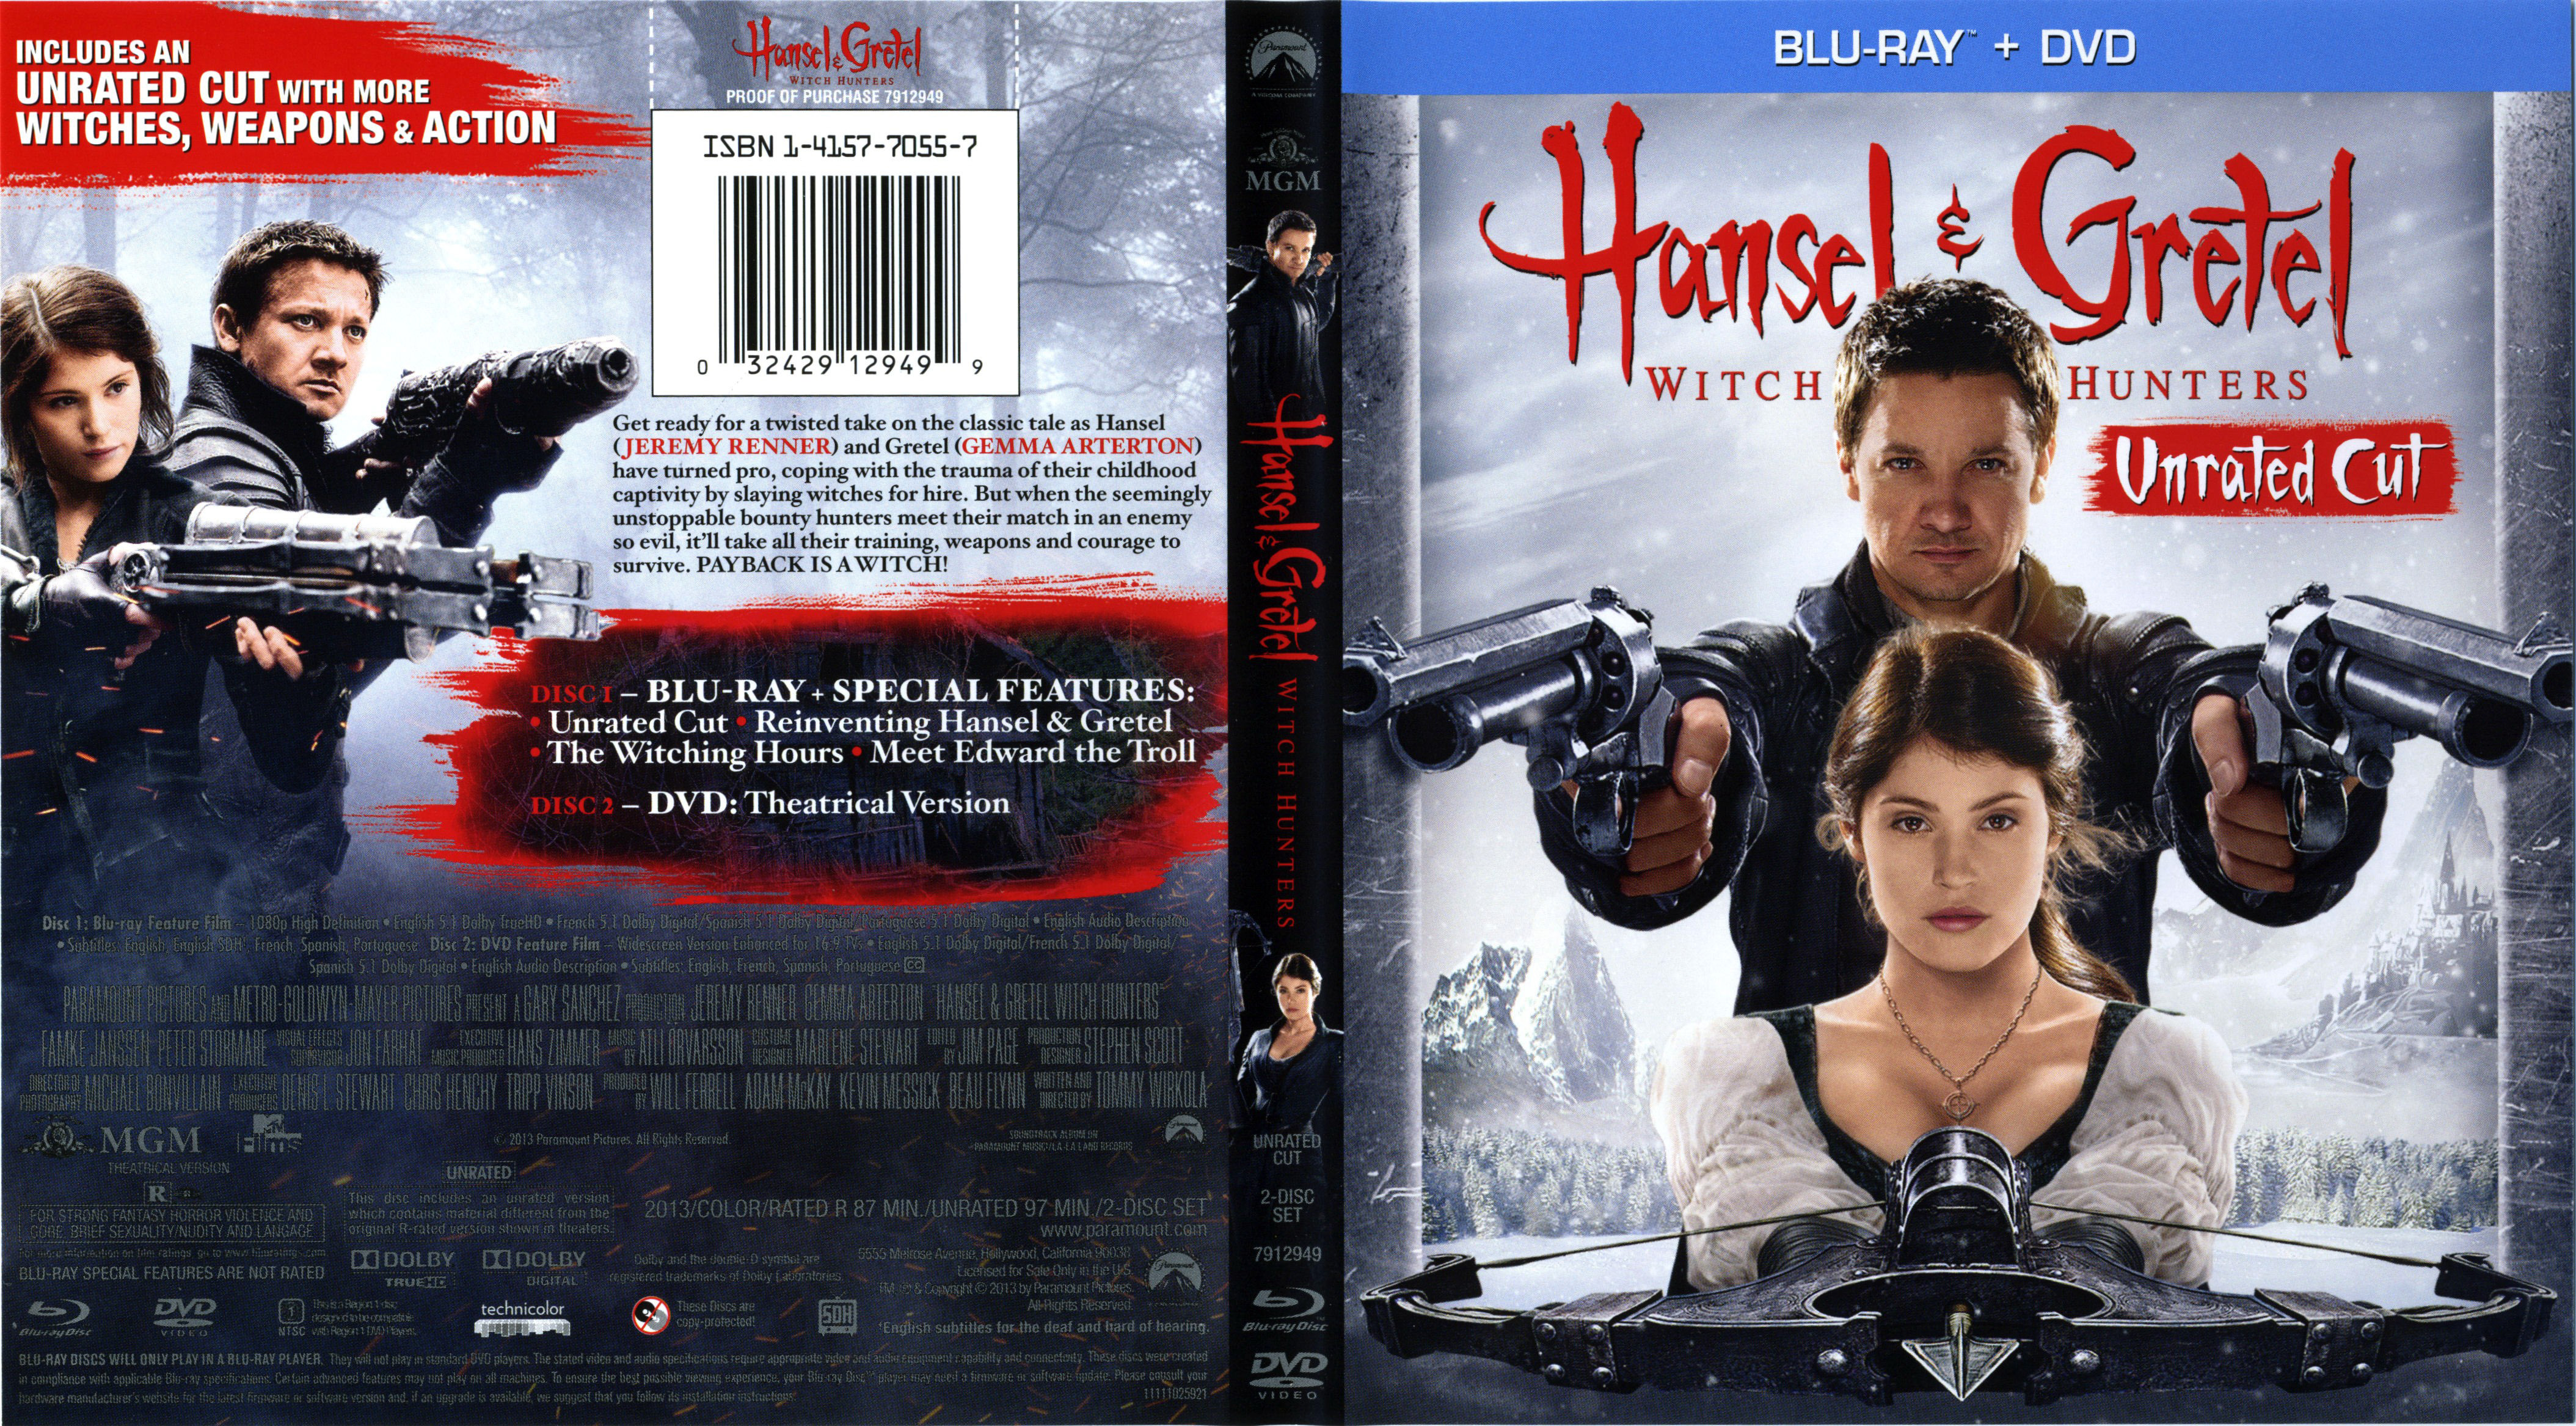 COVERS.BOX.SK ::: Hansel & Gretel Witch Hunters - Unrated Cut (2013) Blu-ray - high ...4217 x 2334